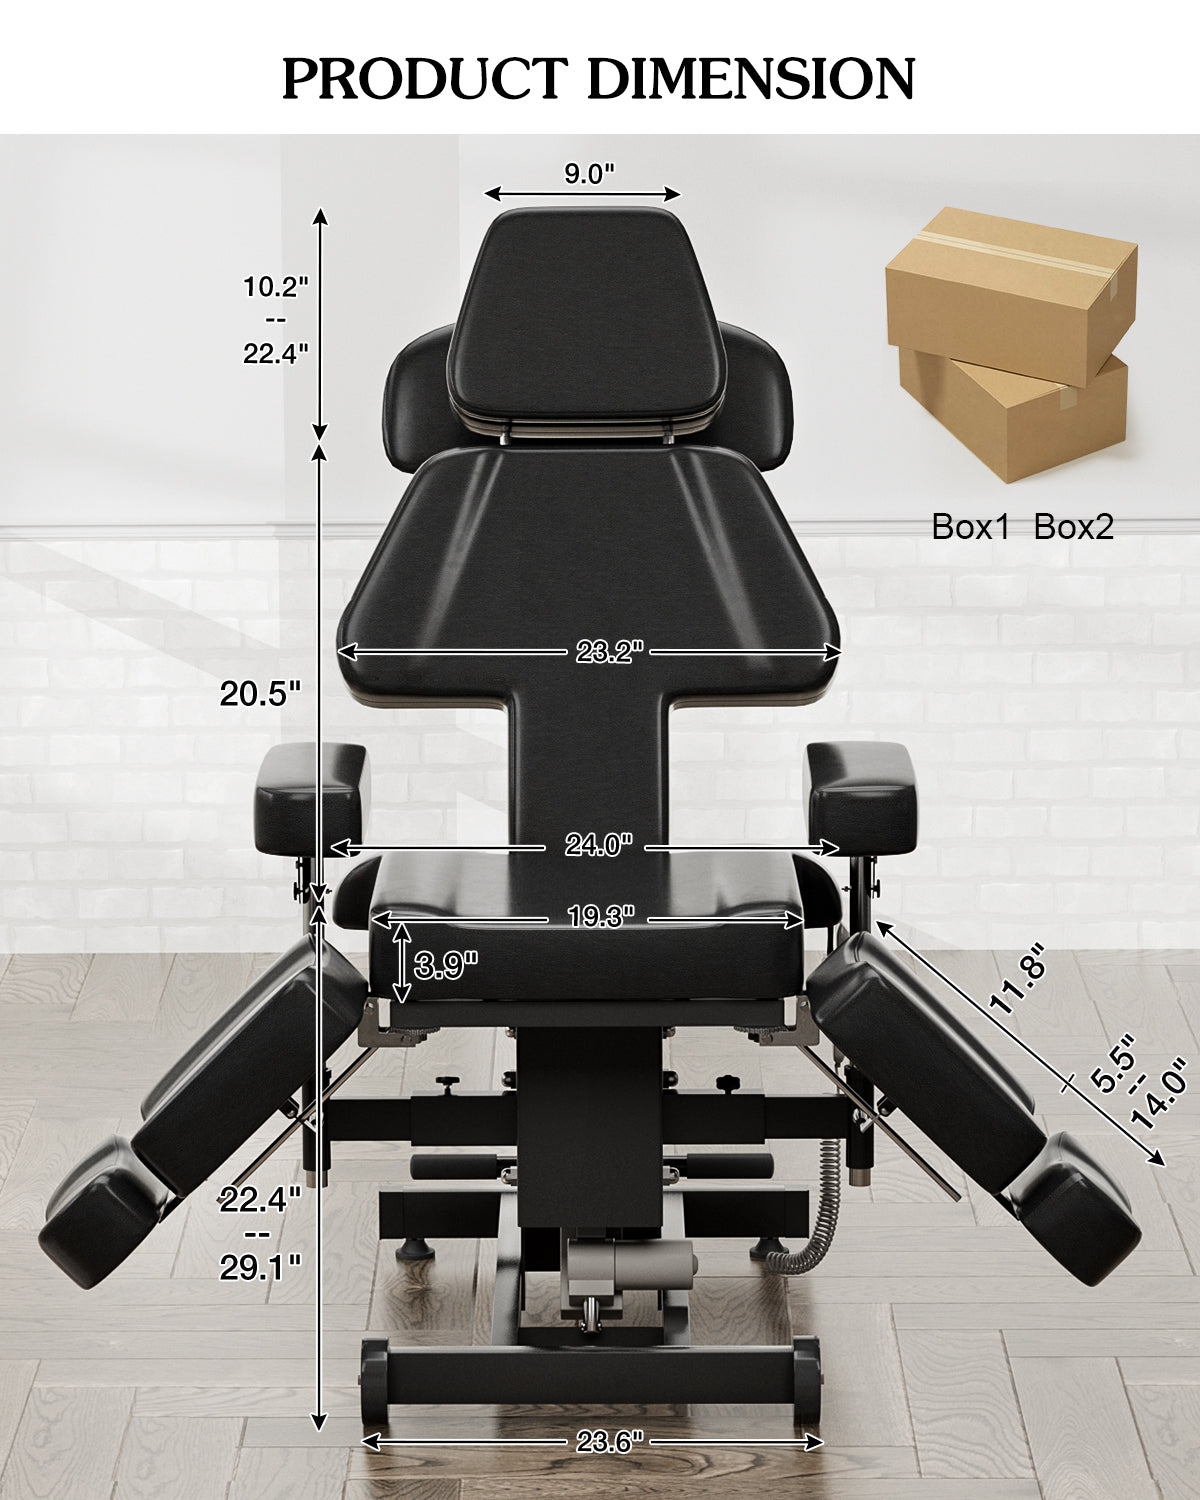 Multi-Purpose Electric Height Adjustable Tattoo Chair